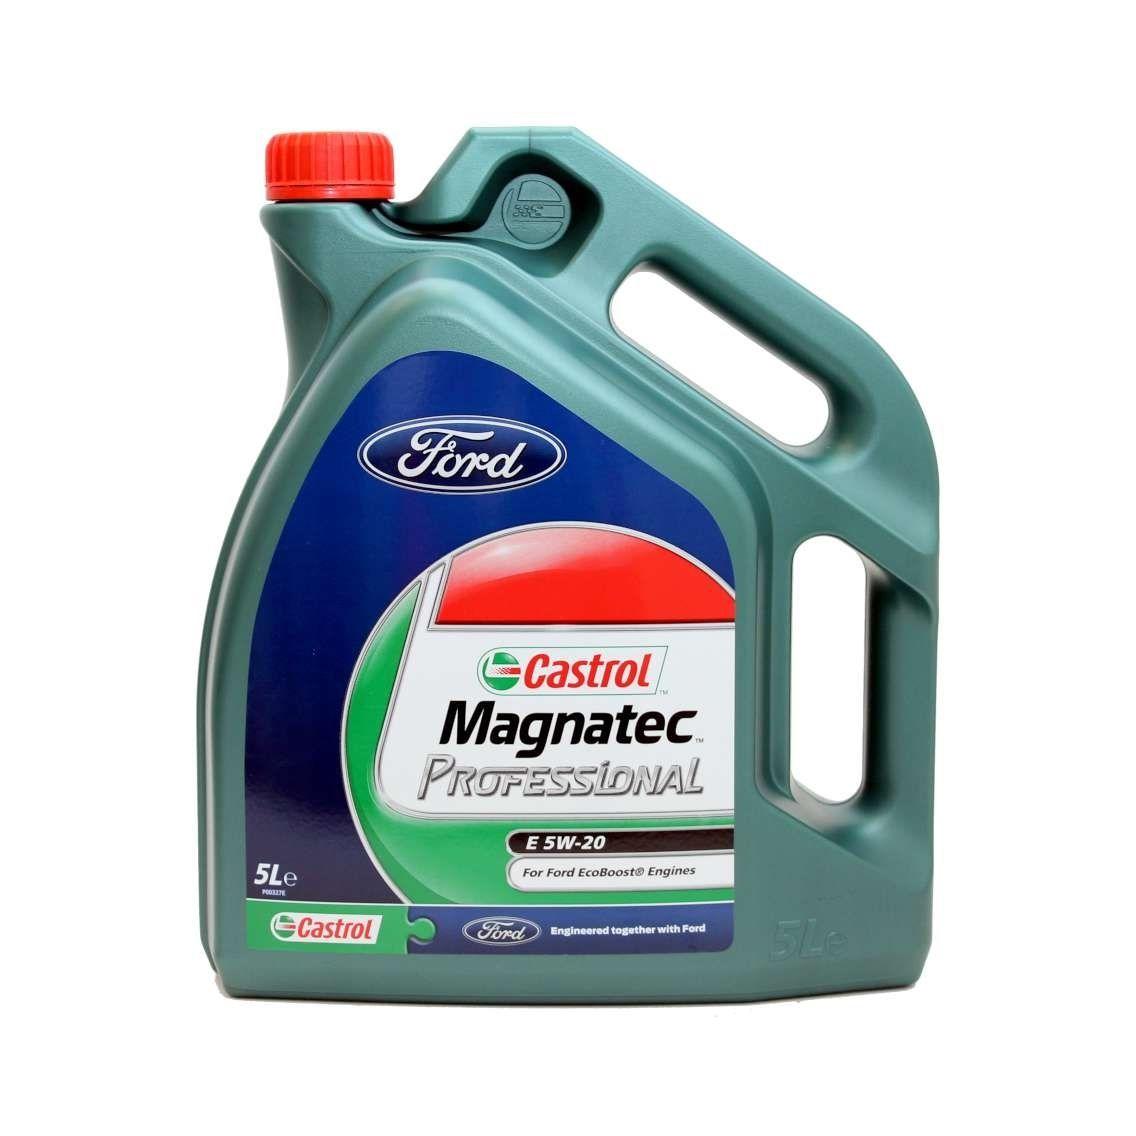 Масло ford ecoboost. Ford Castrol Magnatec professional e 5w20 5л. Castrol Magnatec 5w30 a5 Ford. Масло моторное 5w20 5л Ford Castrol Magnatec professional e WSS m2c948 b. Castrol Magnatec professional e 5w20 5л (Ford) 15800d/15d633.